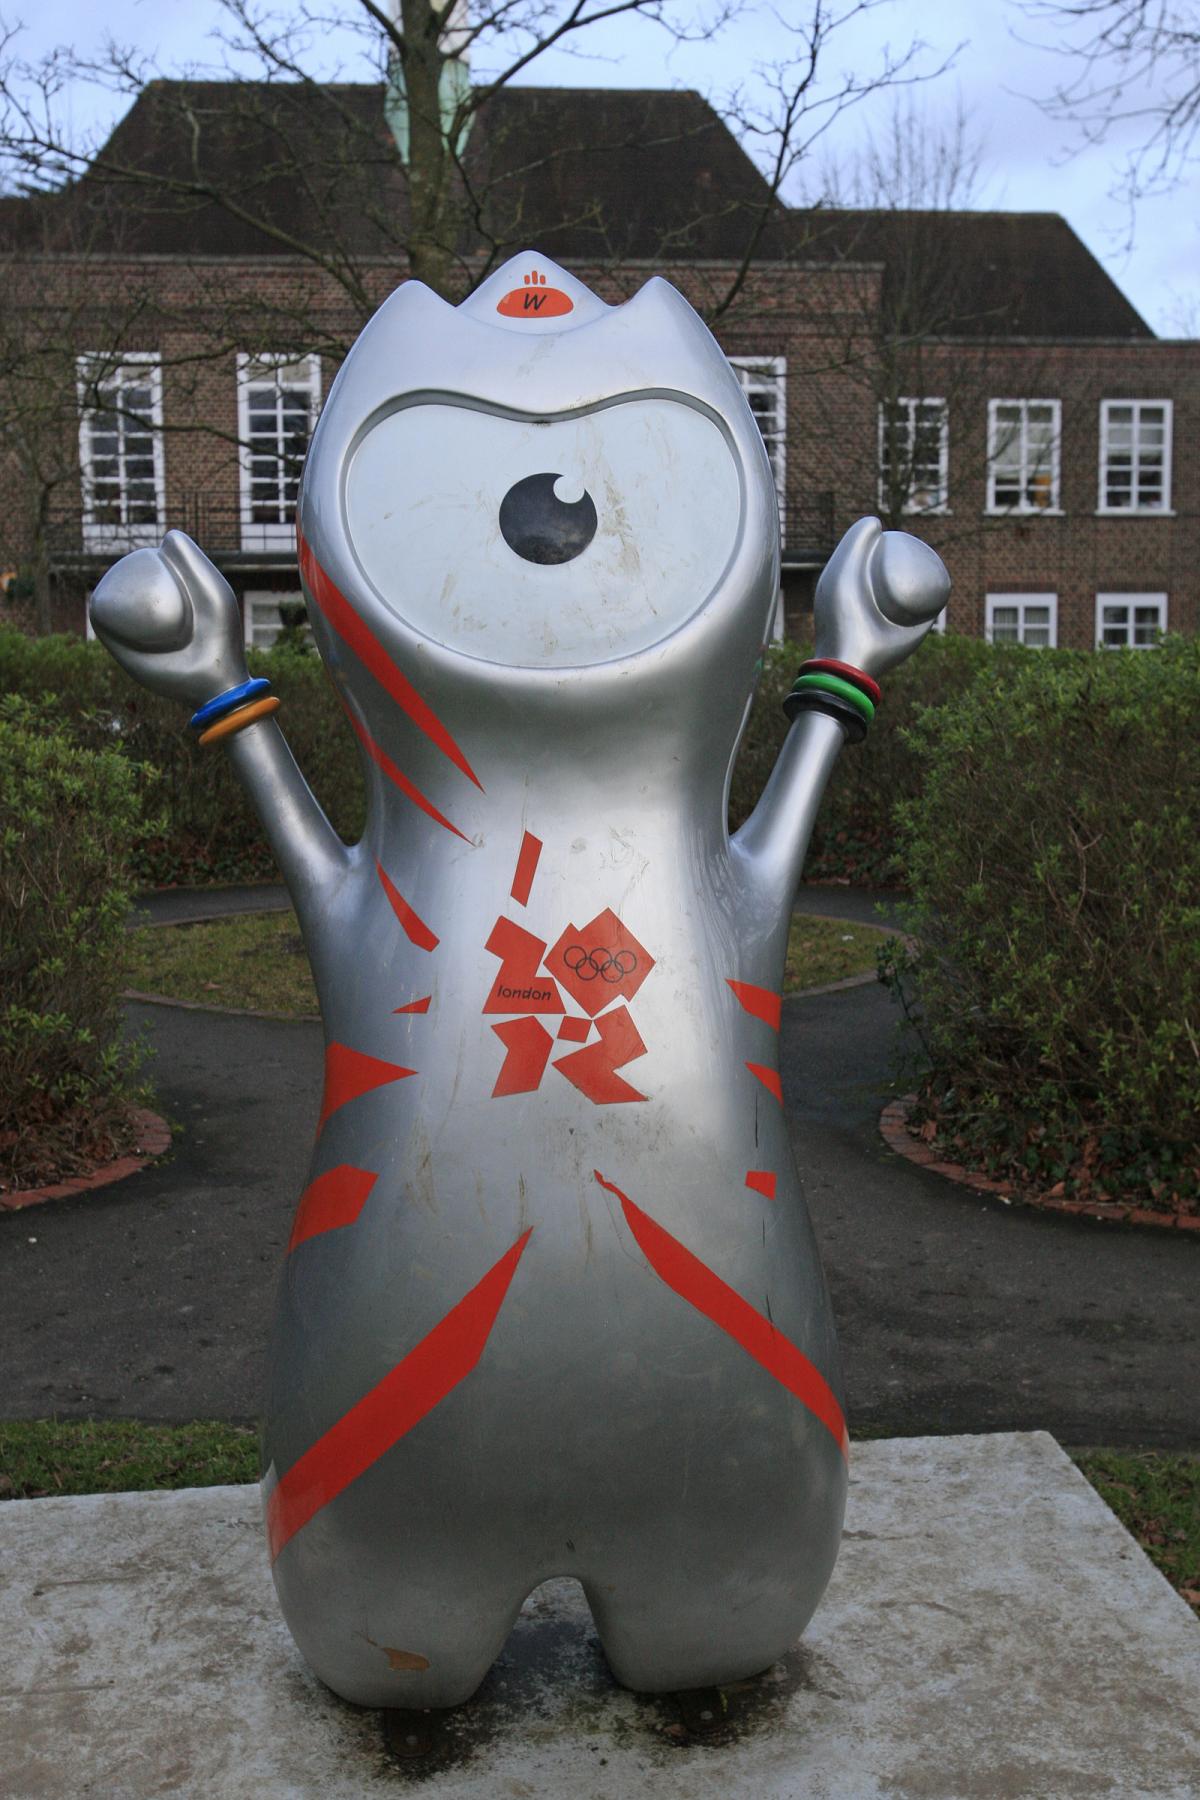 Olympic Mascot in Beaconsfield: Chances are you’ve seen the bizarre 2012 Olympic mascot outside Beaconsfield Town Hall. Looks strangely out of place in a town with no real link to the games.